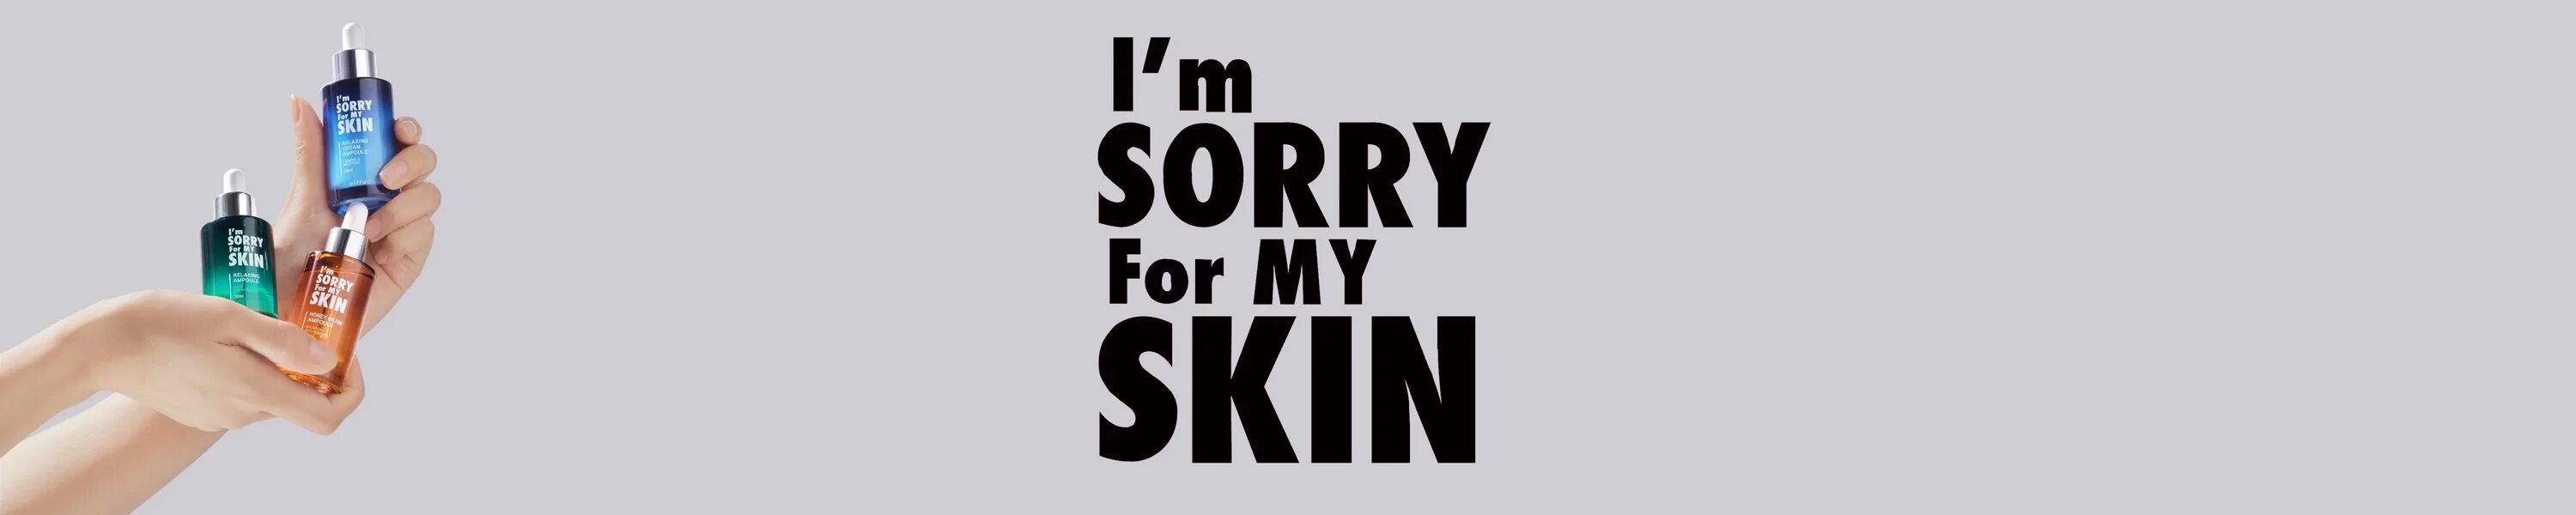 Really sorry for your. I'M sorry for my Skin о бренде. Логотип i`m sorry for my Skin. I'M sorry for my Skin косметика логотип. Логотип сорри.